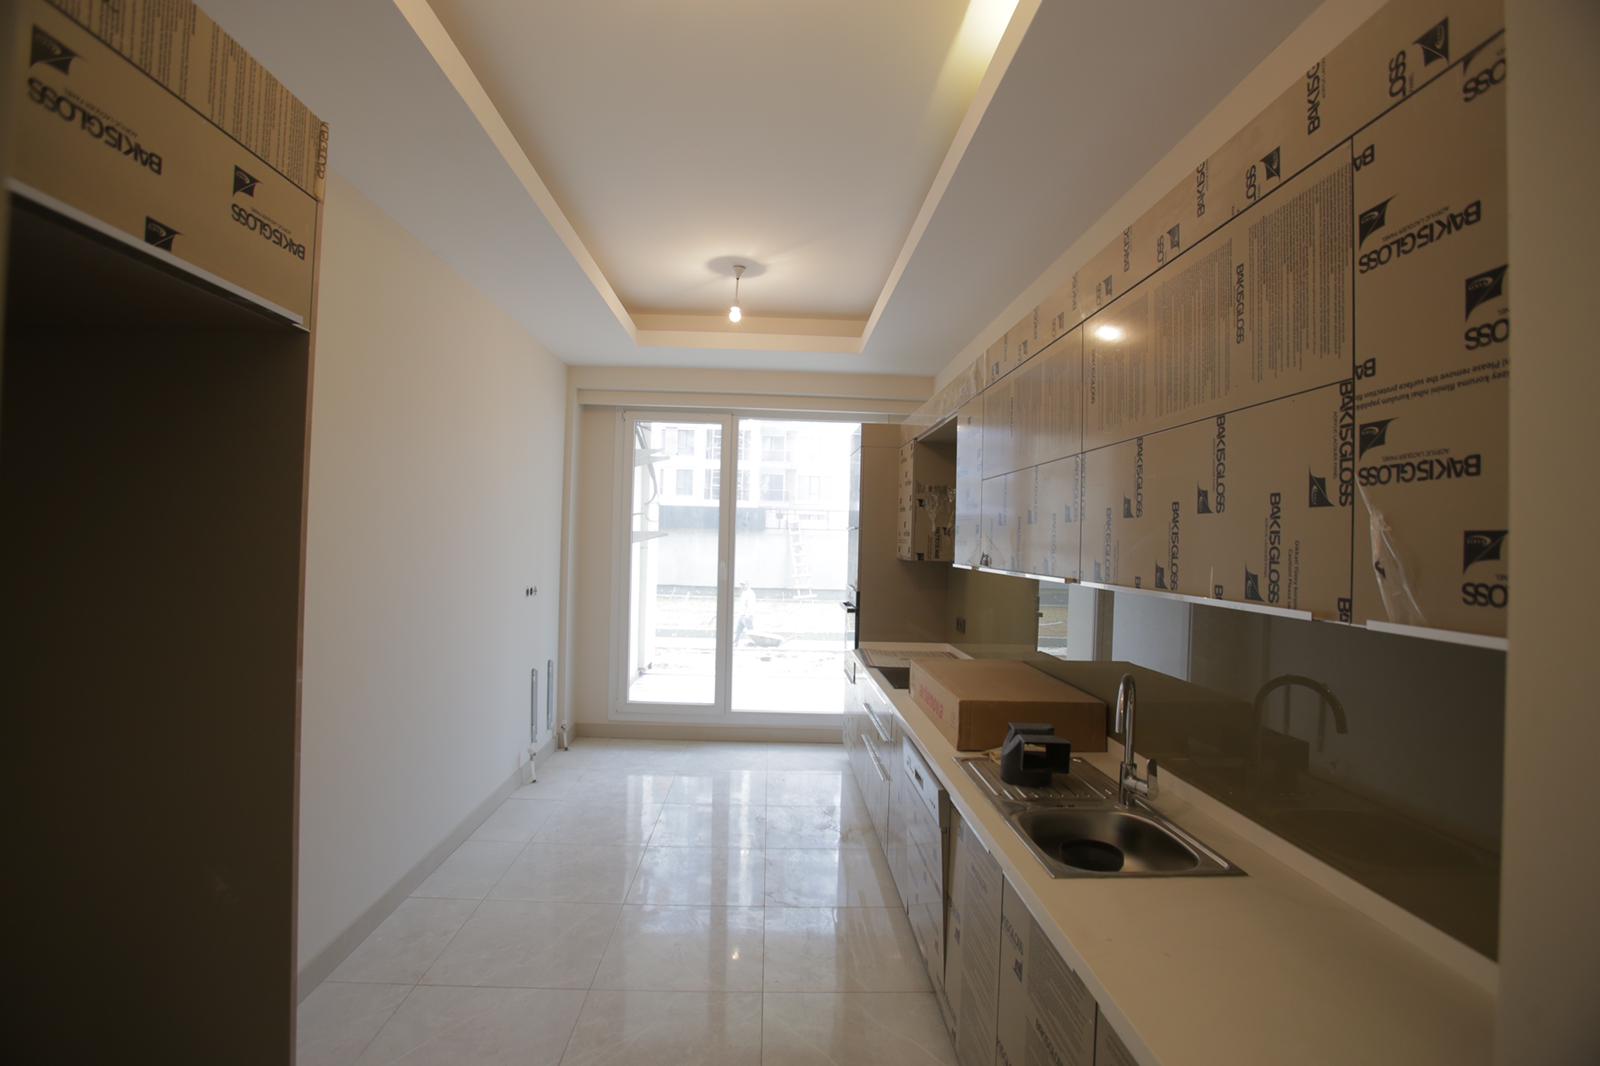 New Homes for Sale in Istanbul 18